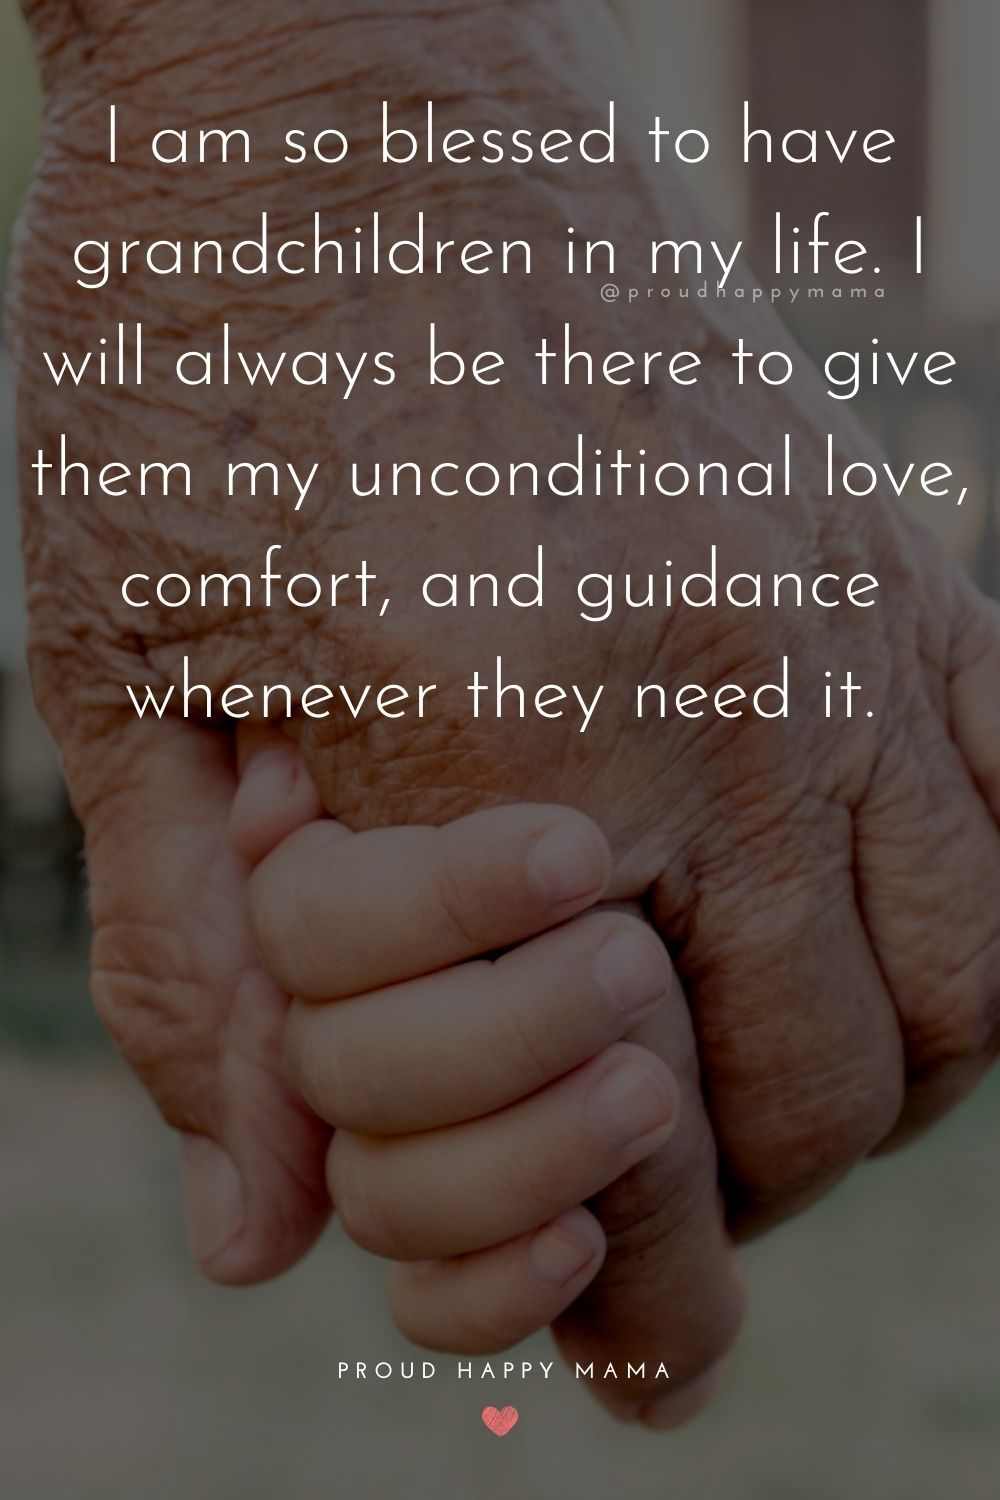 Grandson Quotes - I am so blessed to have grandchildren in my life. I will always be there to give them my unconditional love, comfort, and guidance whenever they need it.